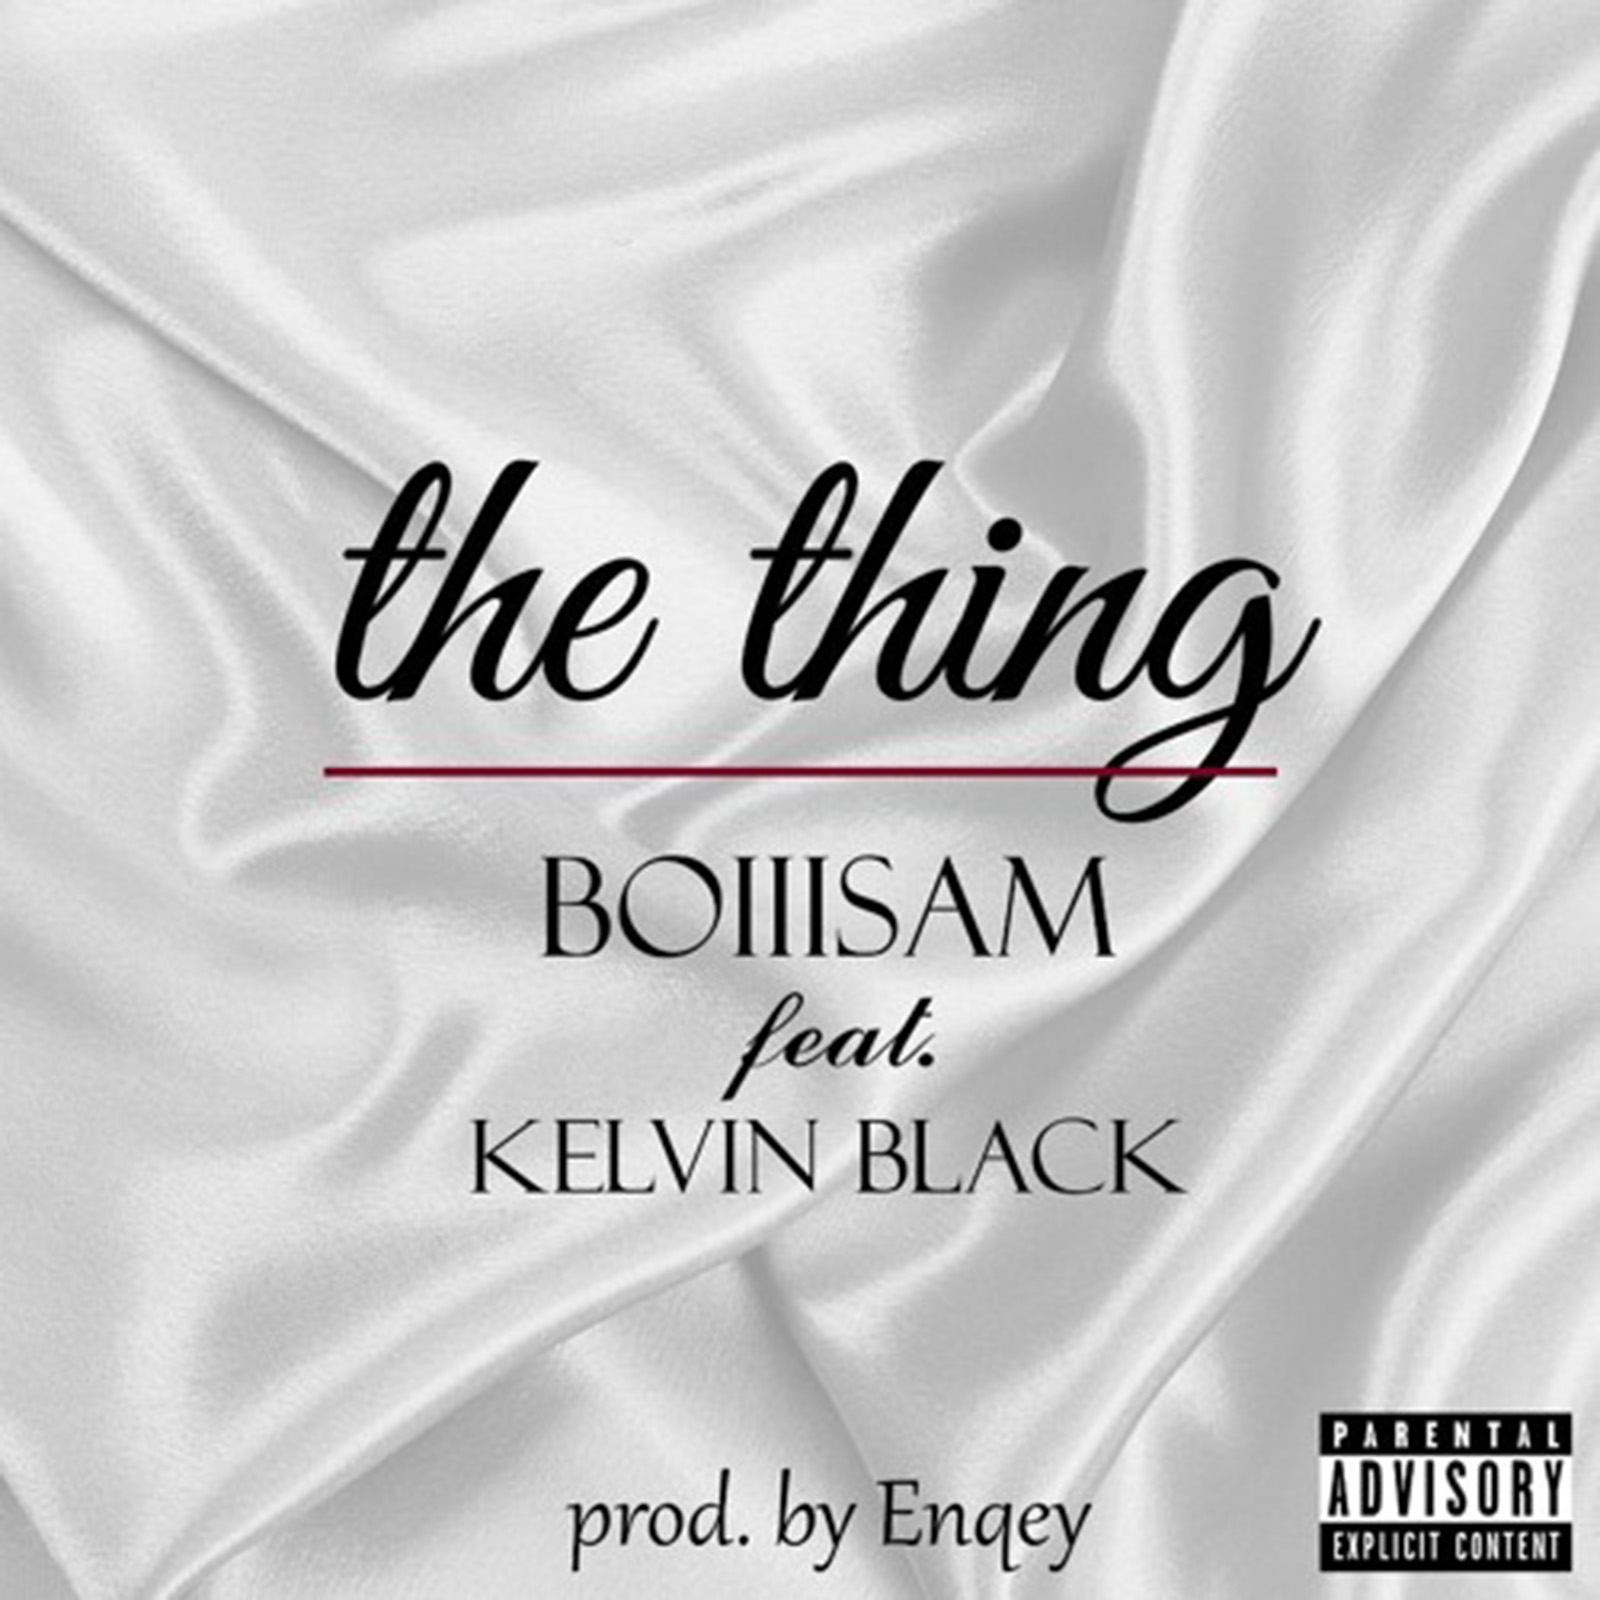 The Thing by BoiiiSam feat. Kelvin Black